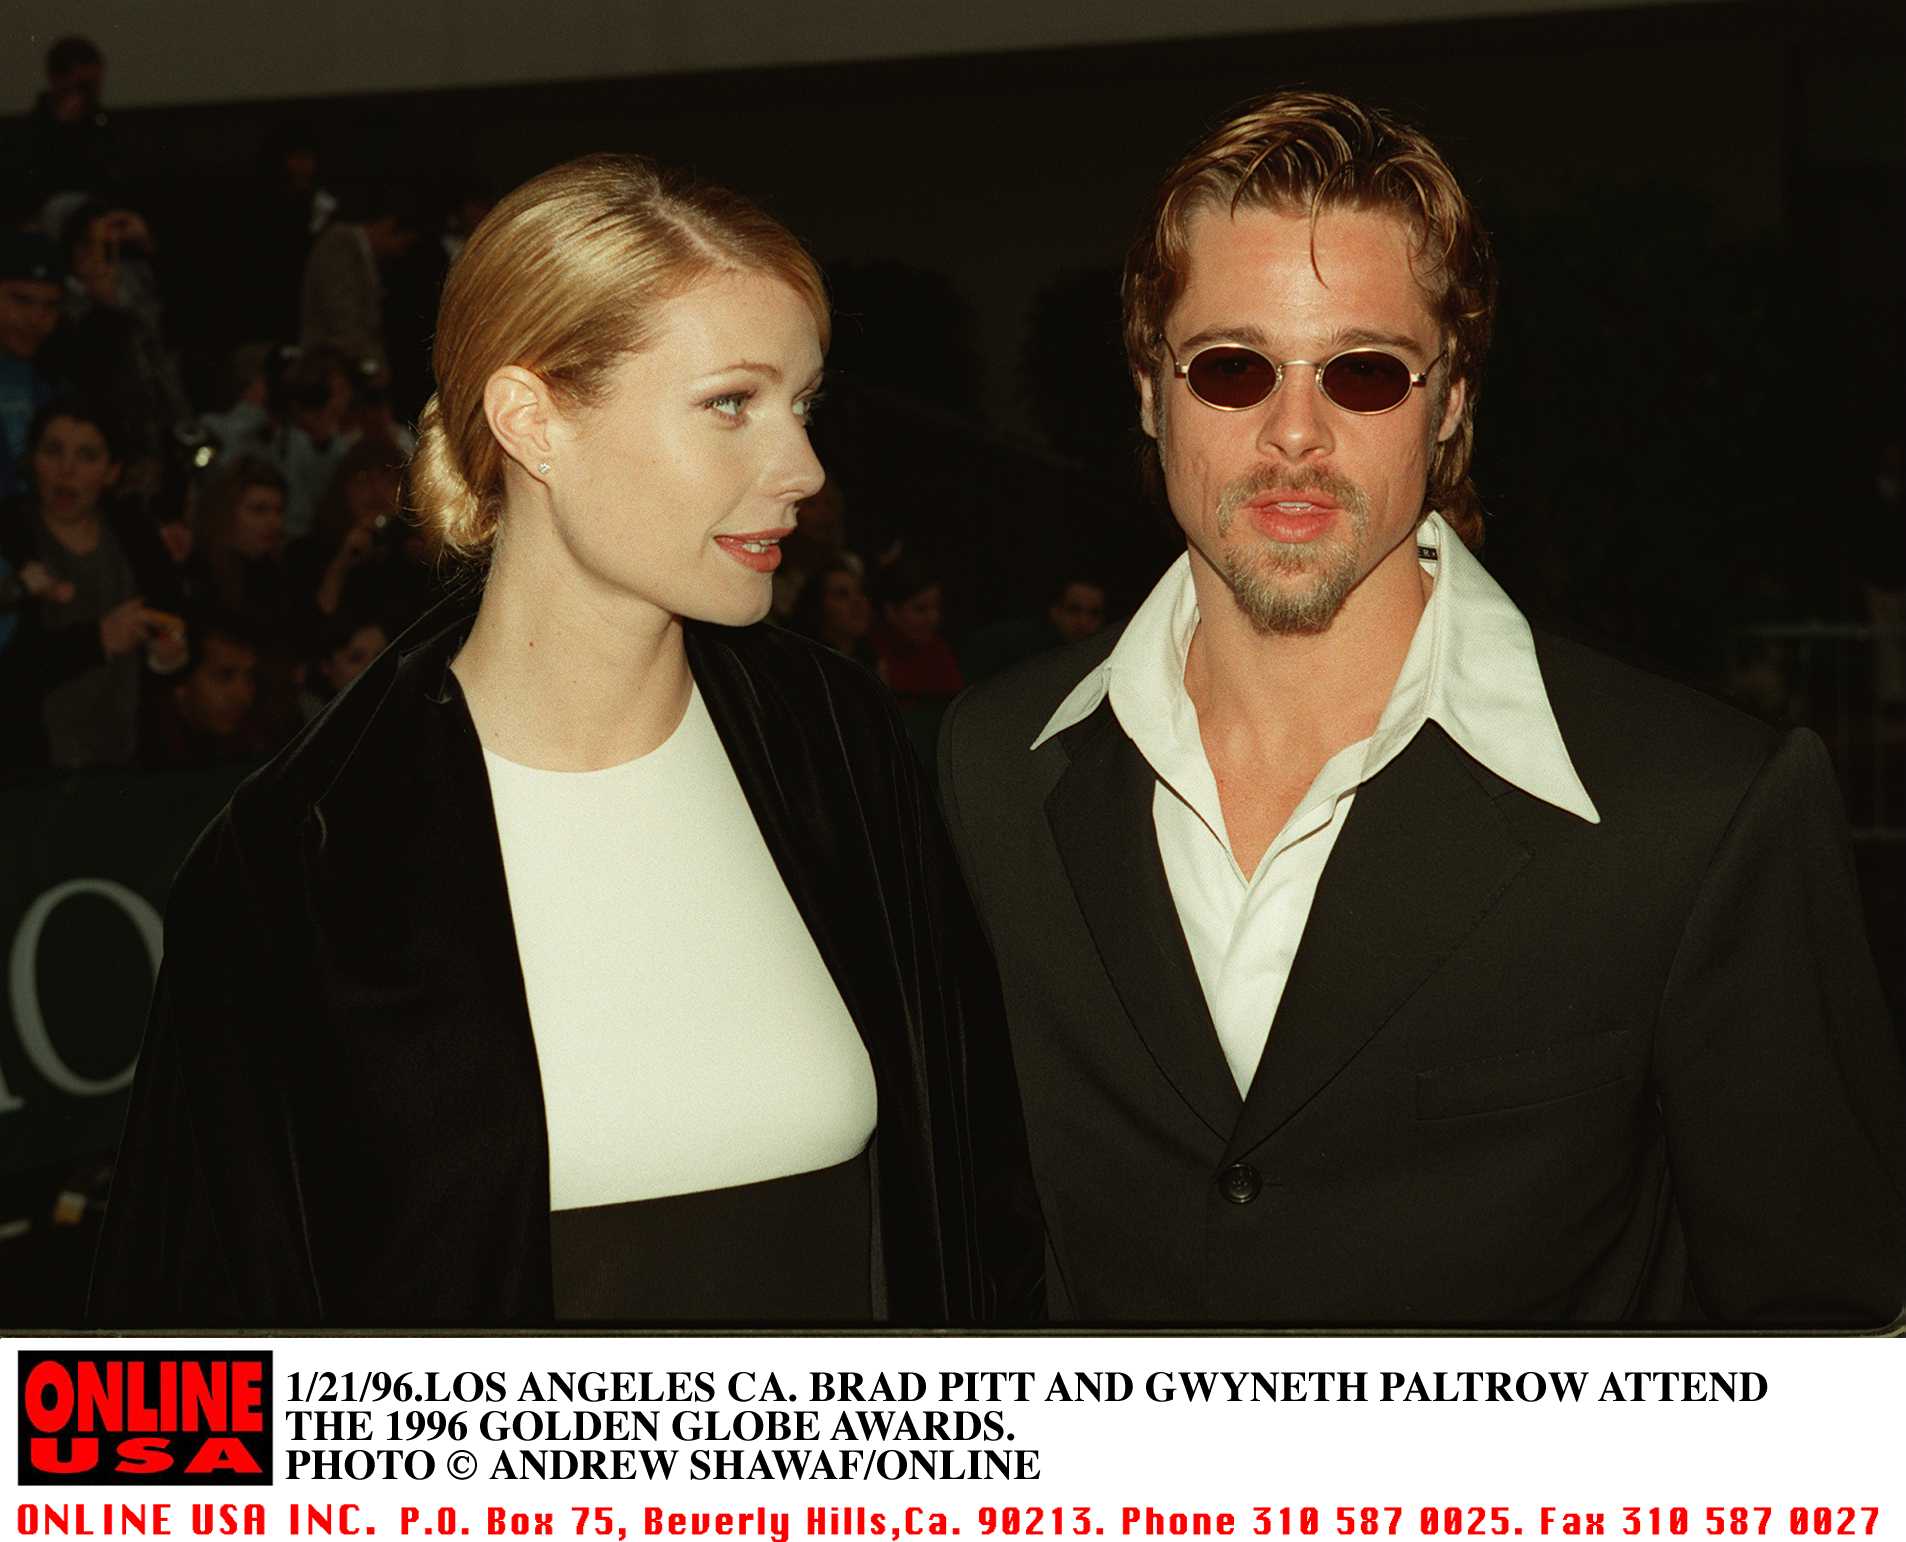 Gwyneth Paltrow and Brad Pitt at the Golden Globes Awards on January 21, 1996 | Source: Getty Images